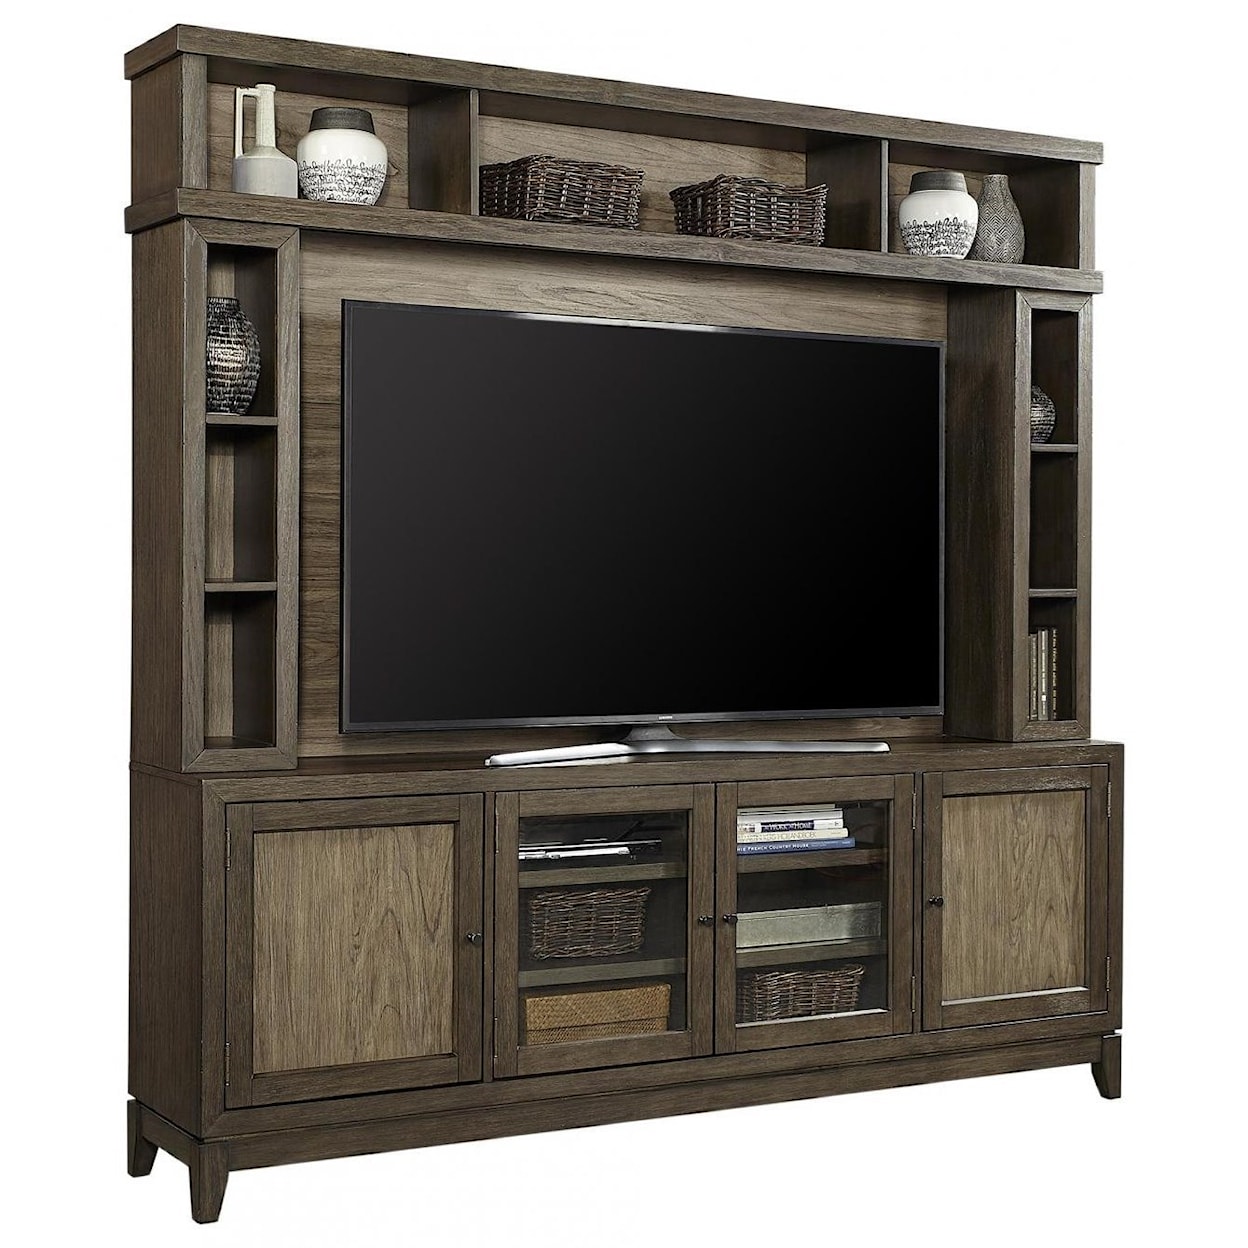 Aspenhome South Haven South Haven TV Stand and Hutch